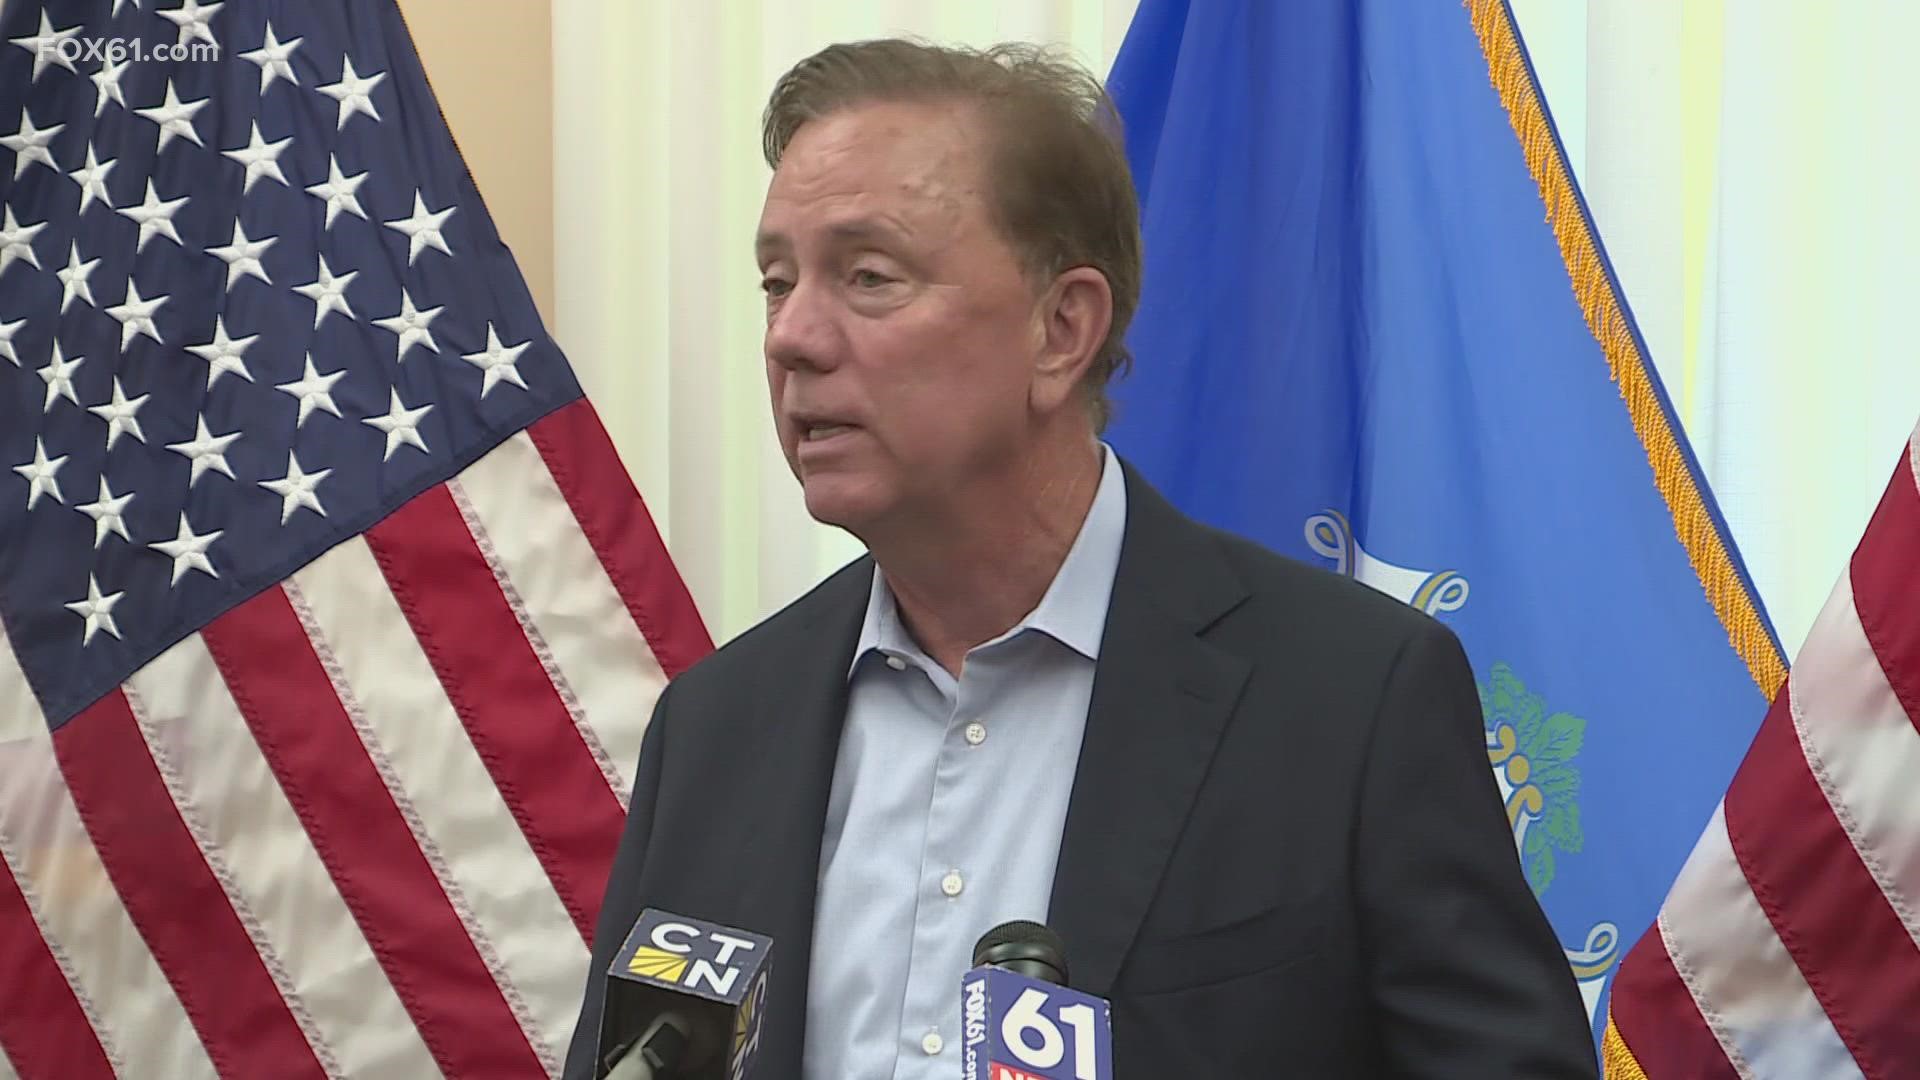 This past spring, Gov. Ned Lamont signed the budget bill that included a child tax rebate of up to $250 per child, and a maximum of three children, adding up to $750